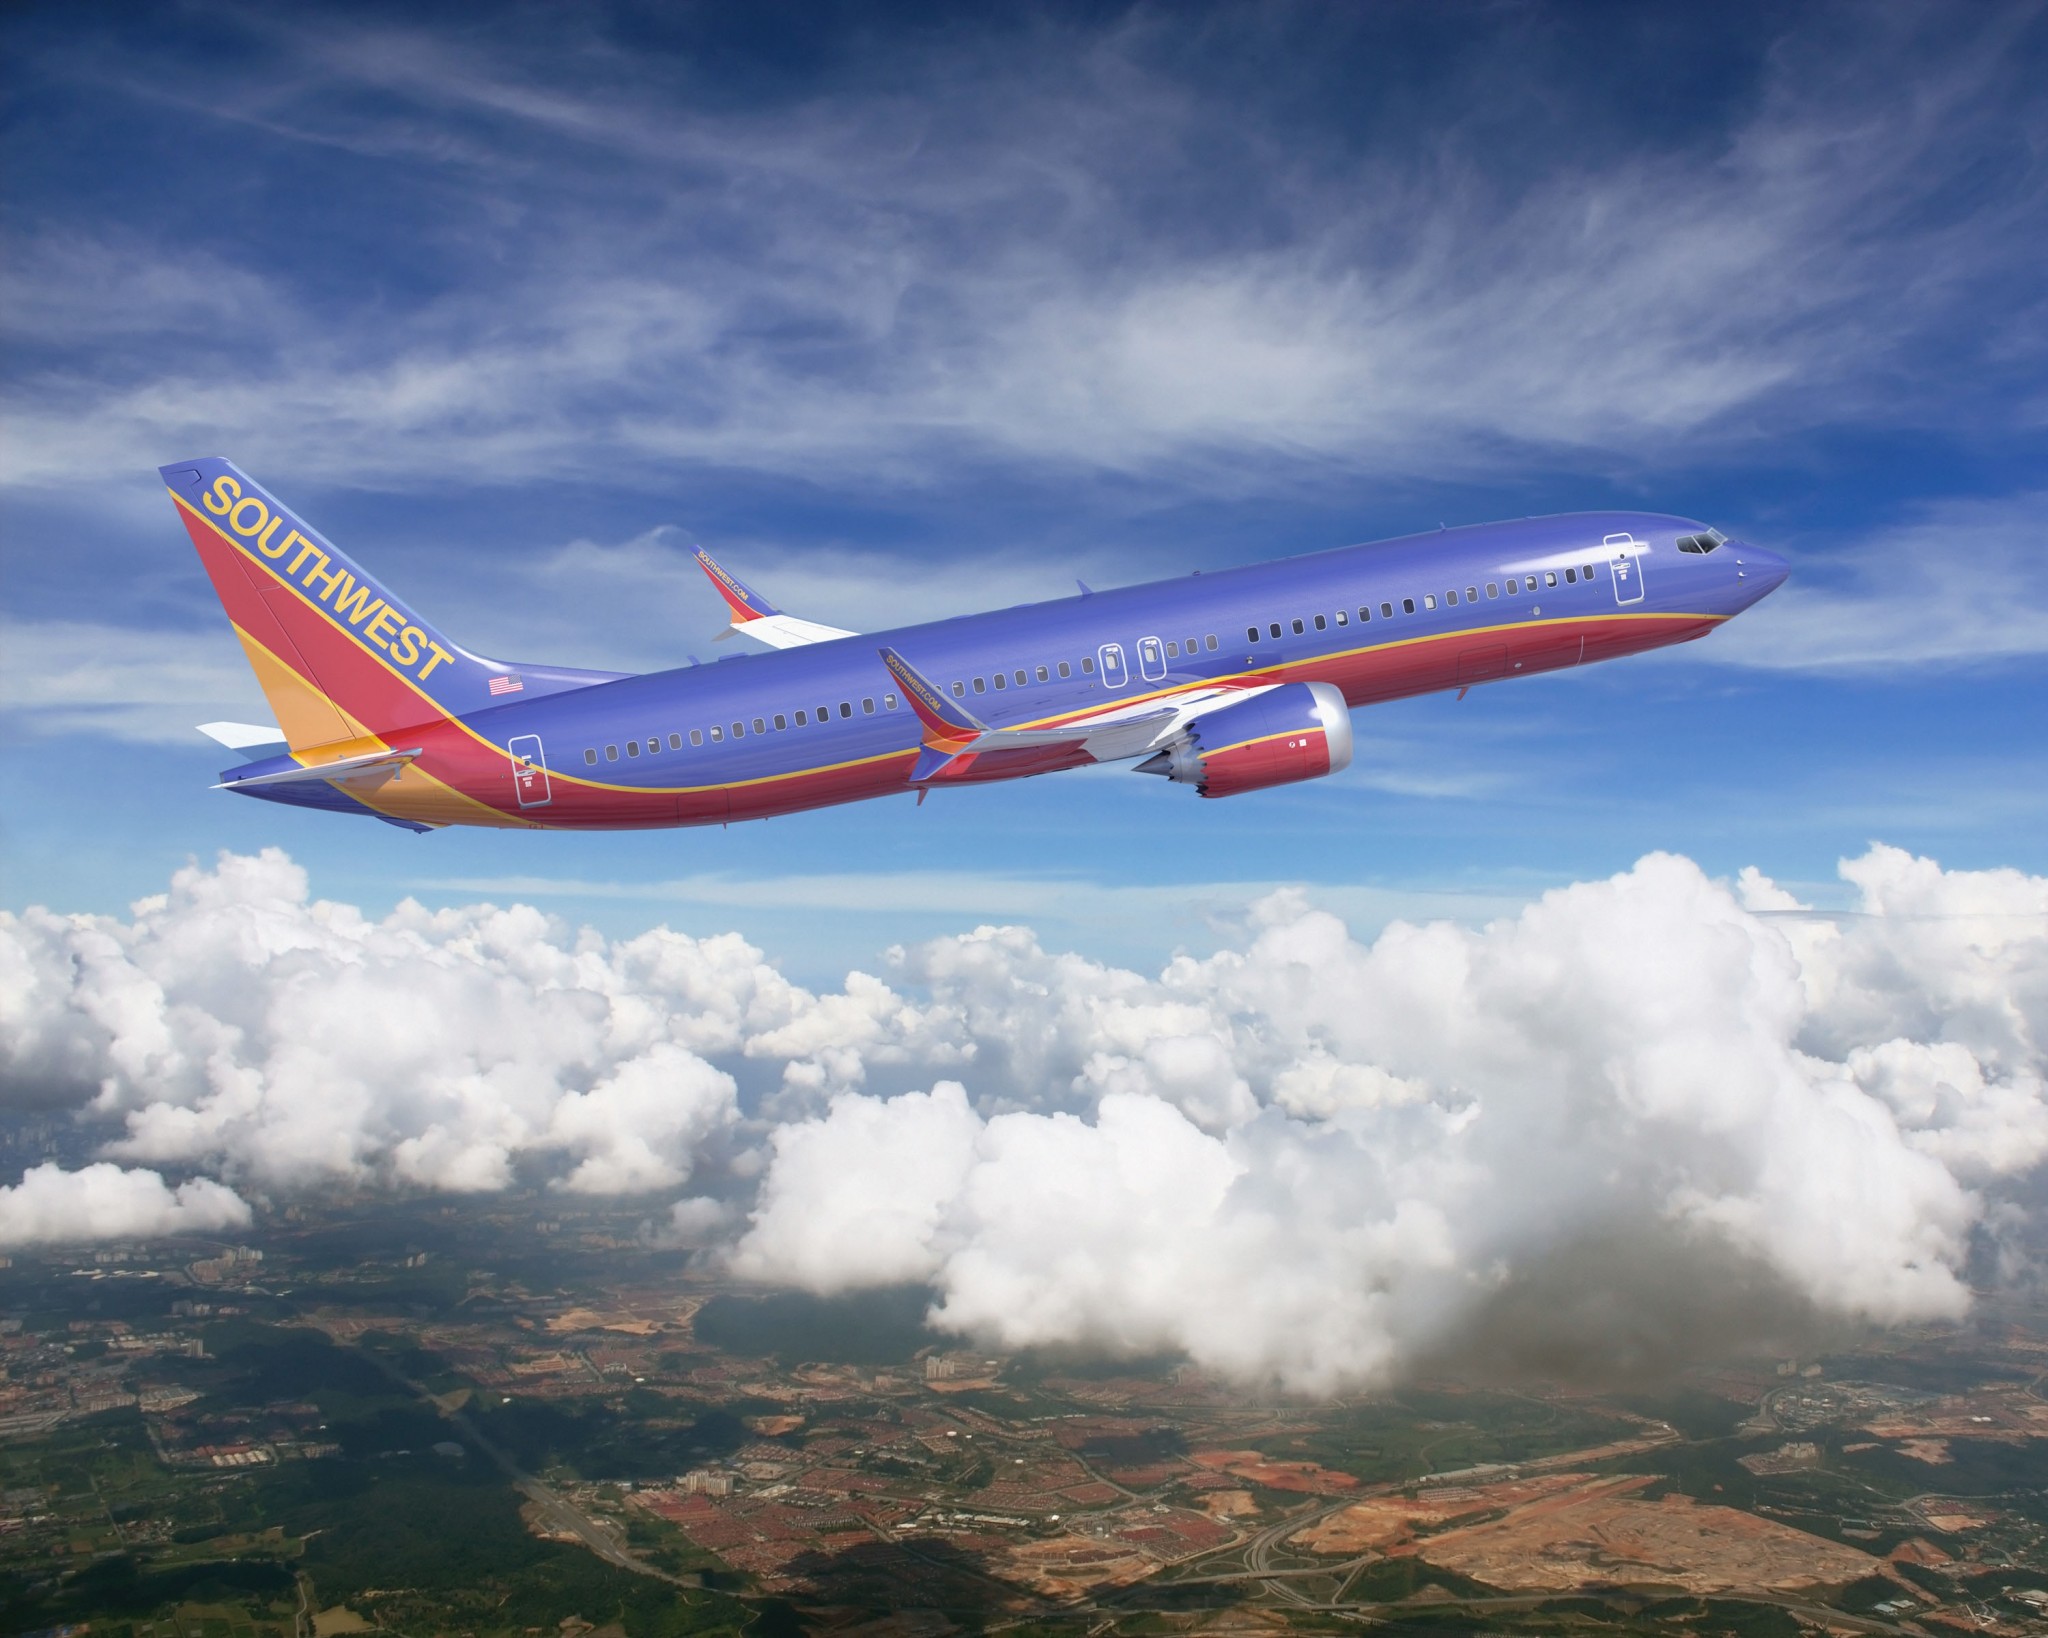 Southwest Airlines’ mechanics approve new contract